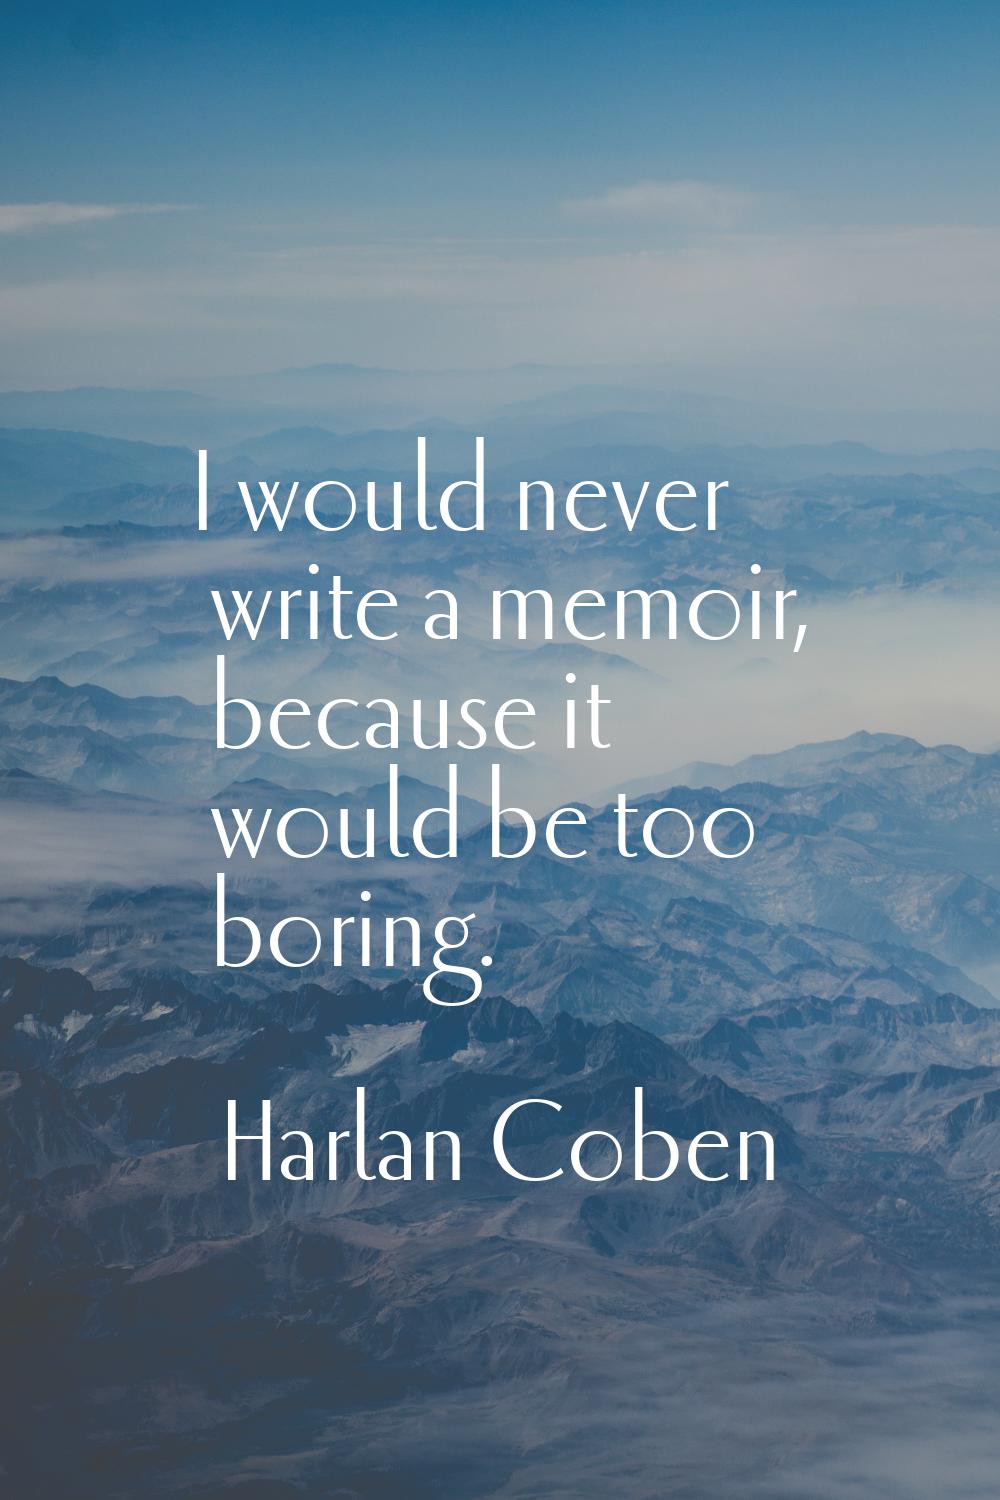 I would never write a memoir, because it would be too boring.